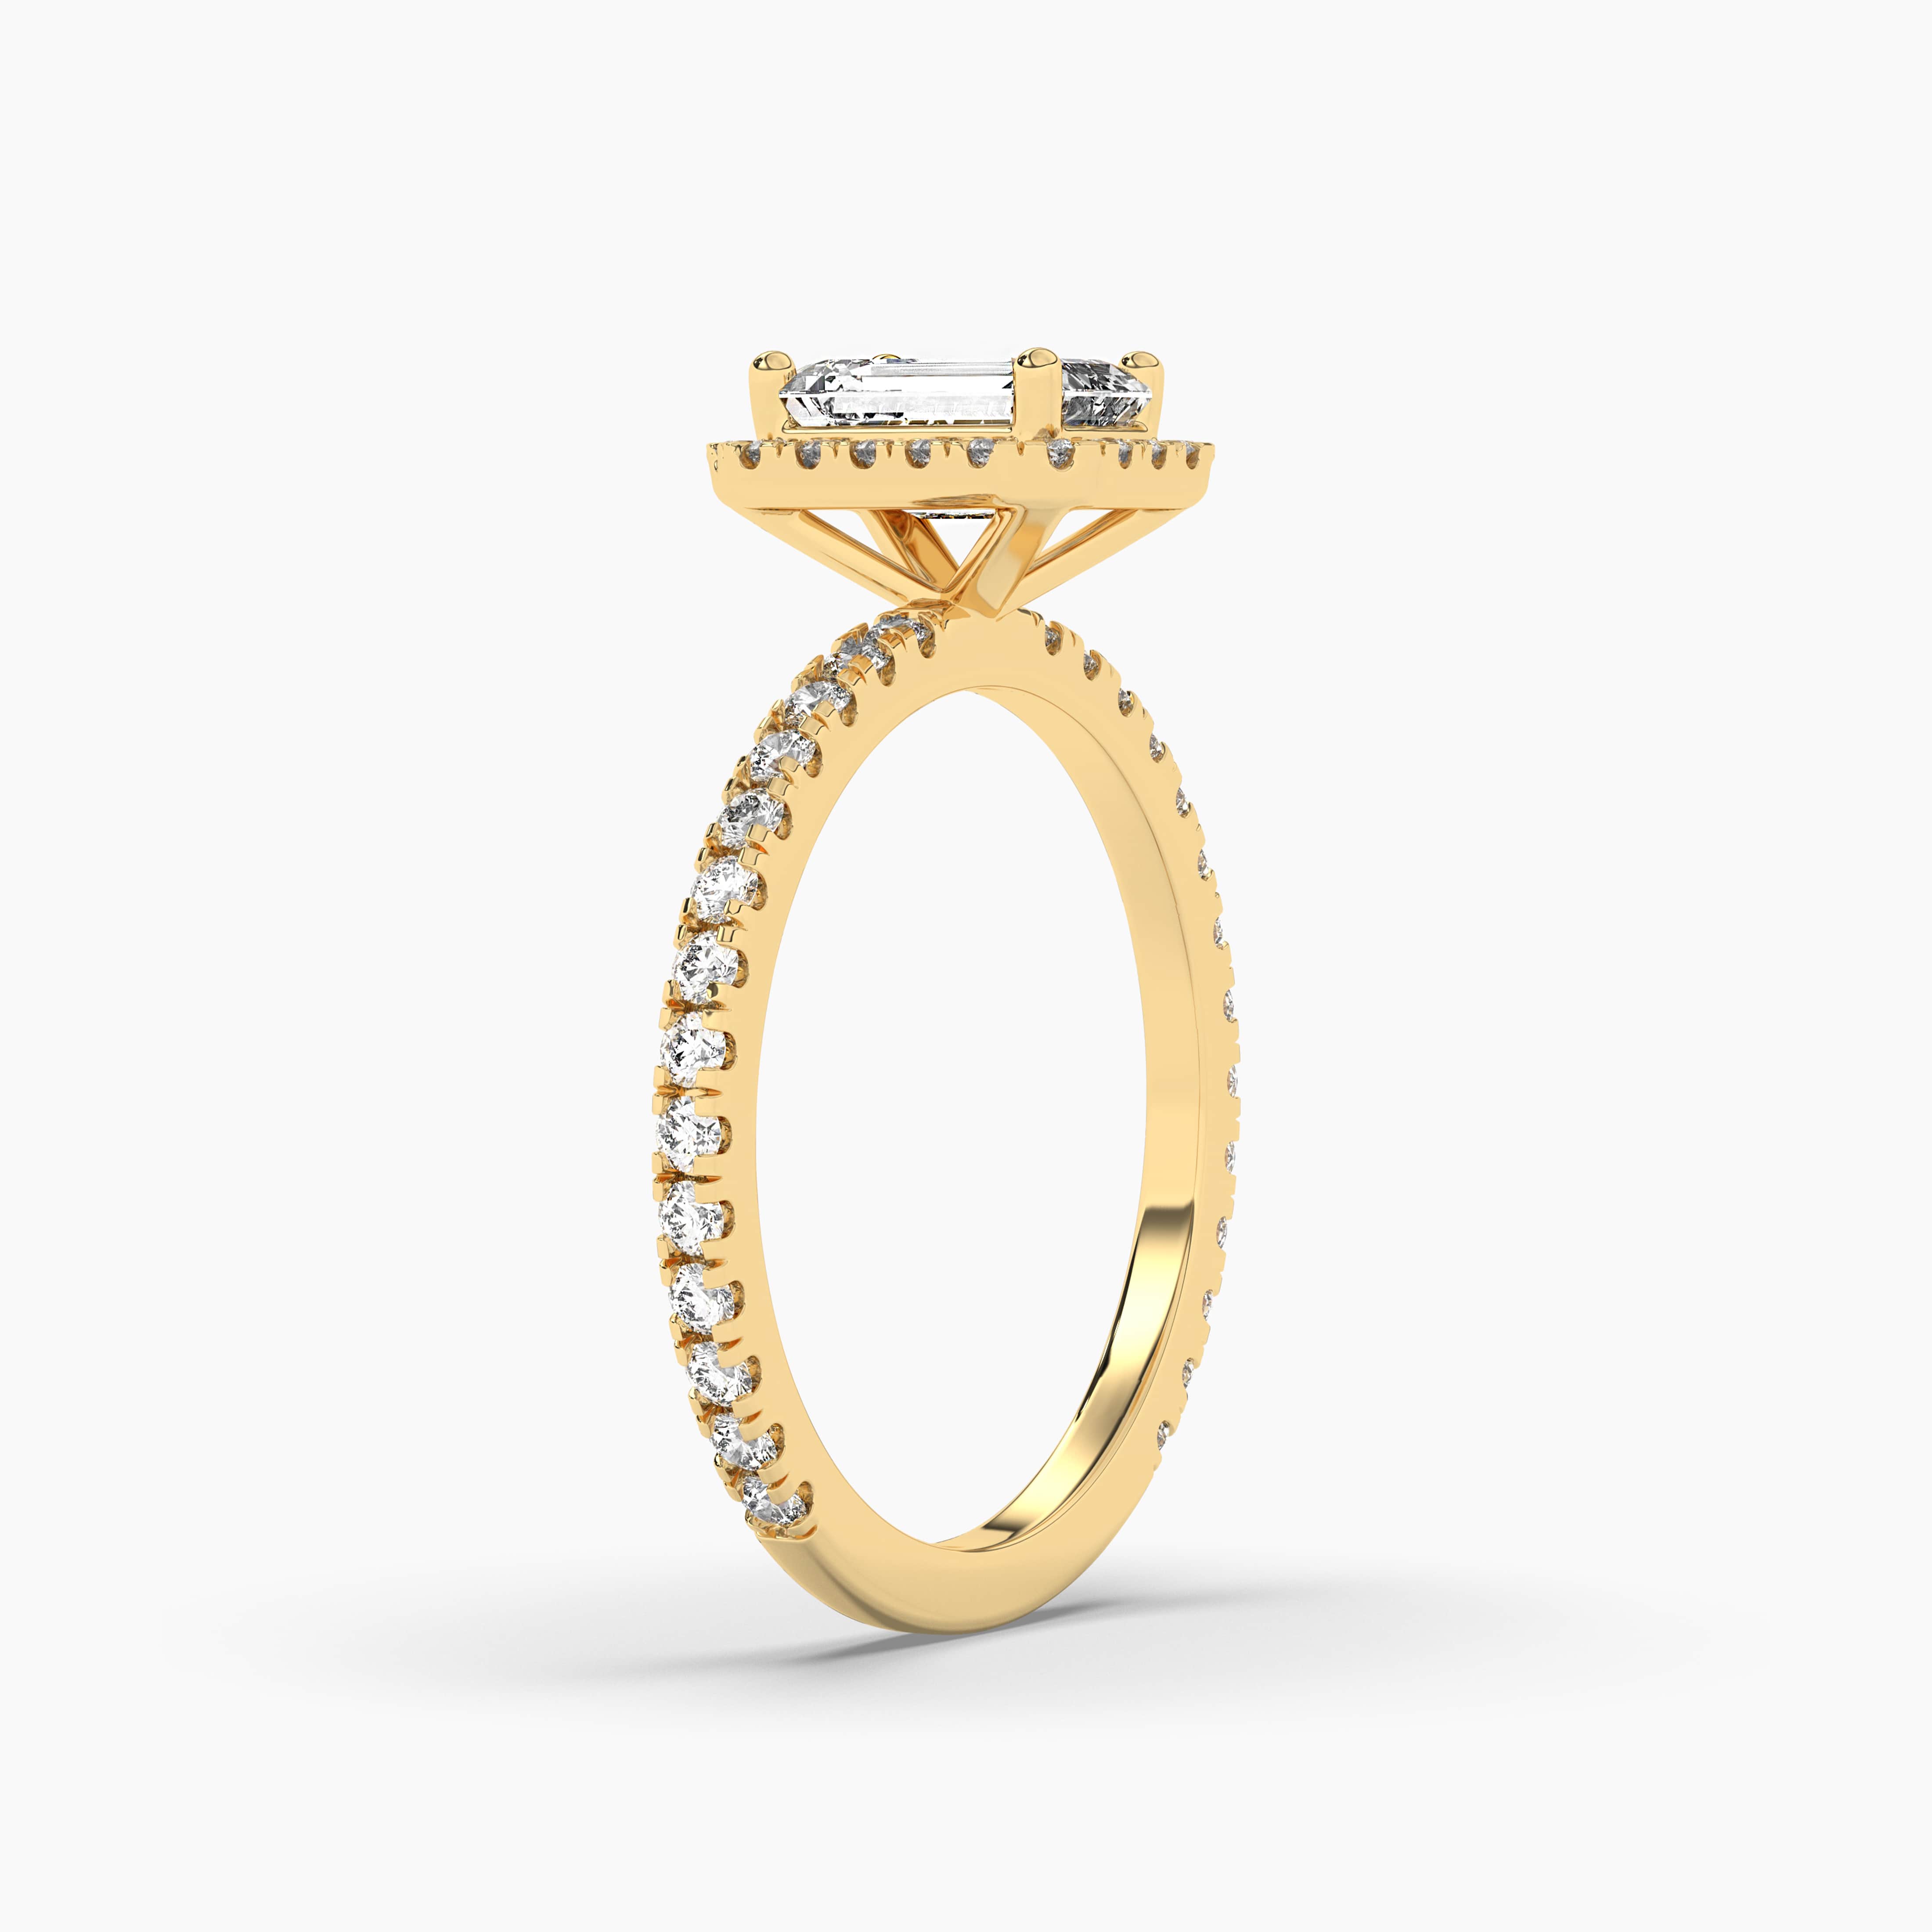 Emerald Cut Diamond Engagement Ring In Yellow Gold